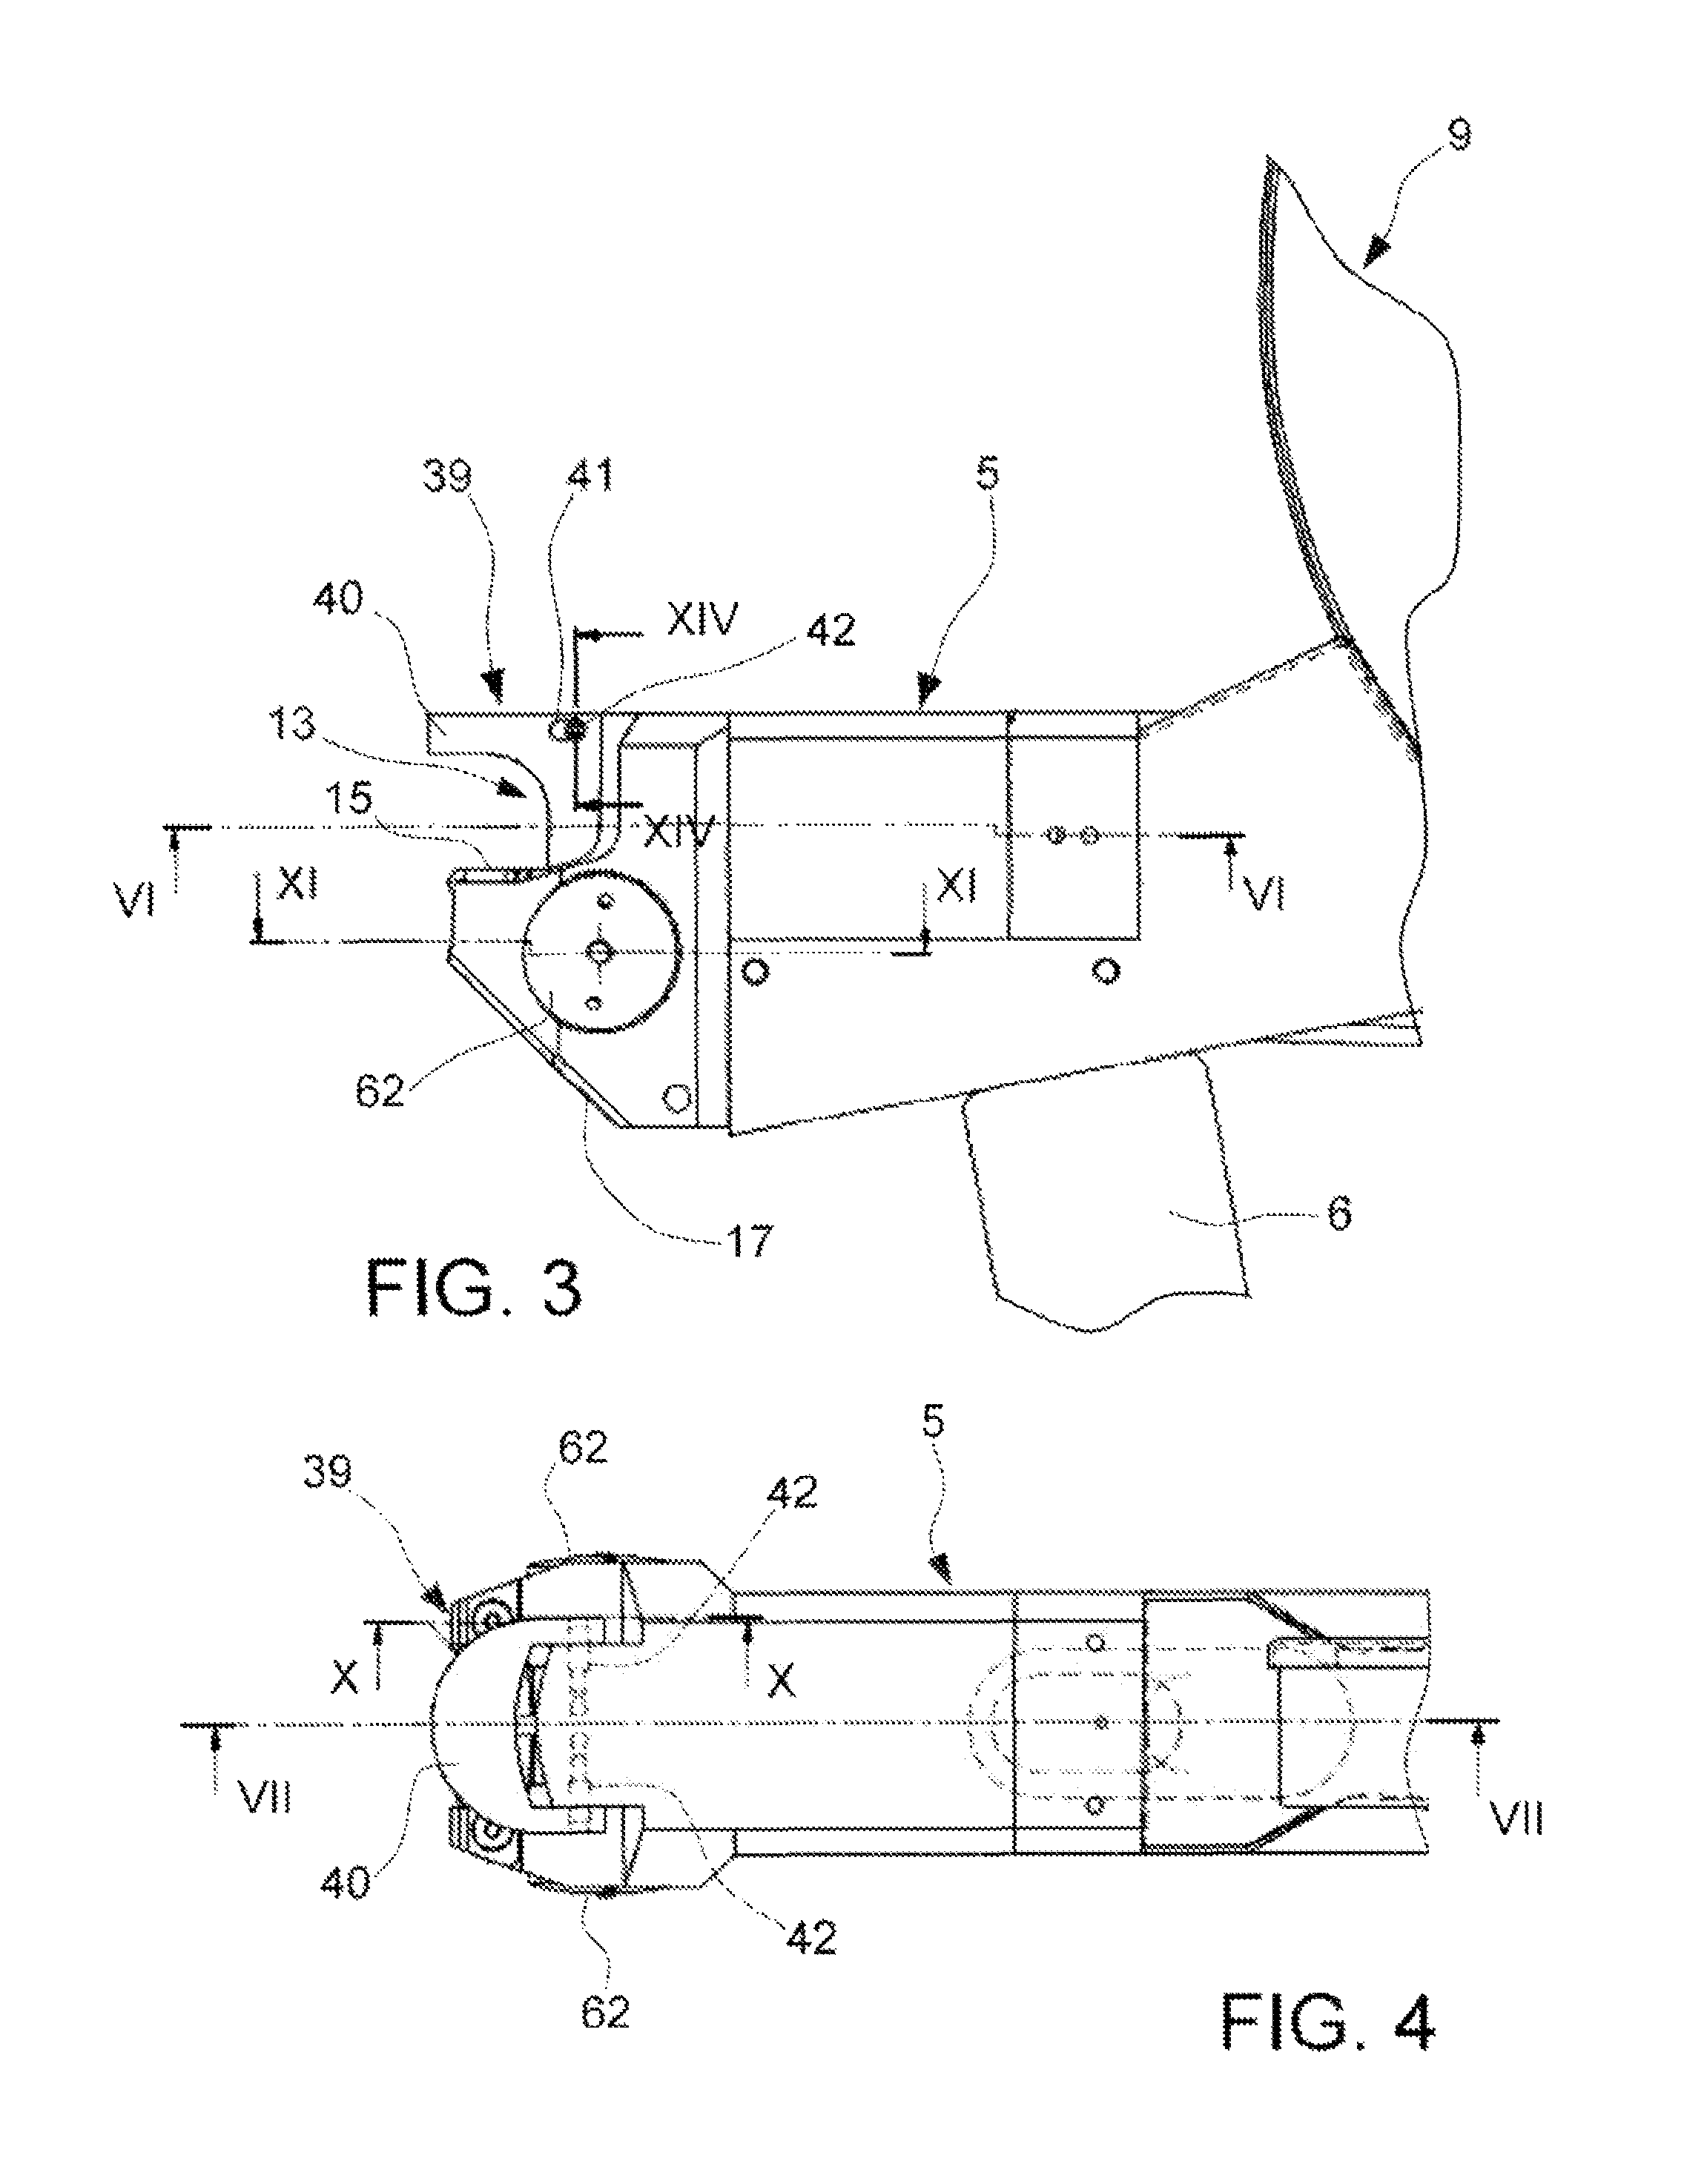 Apparatus for the application of spacer elements onto plates